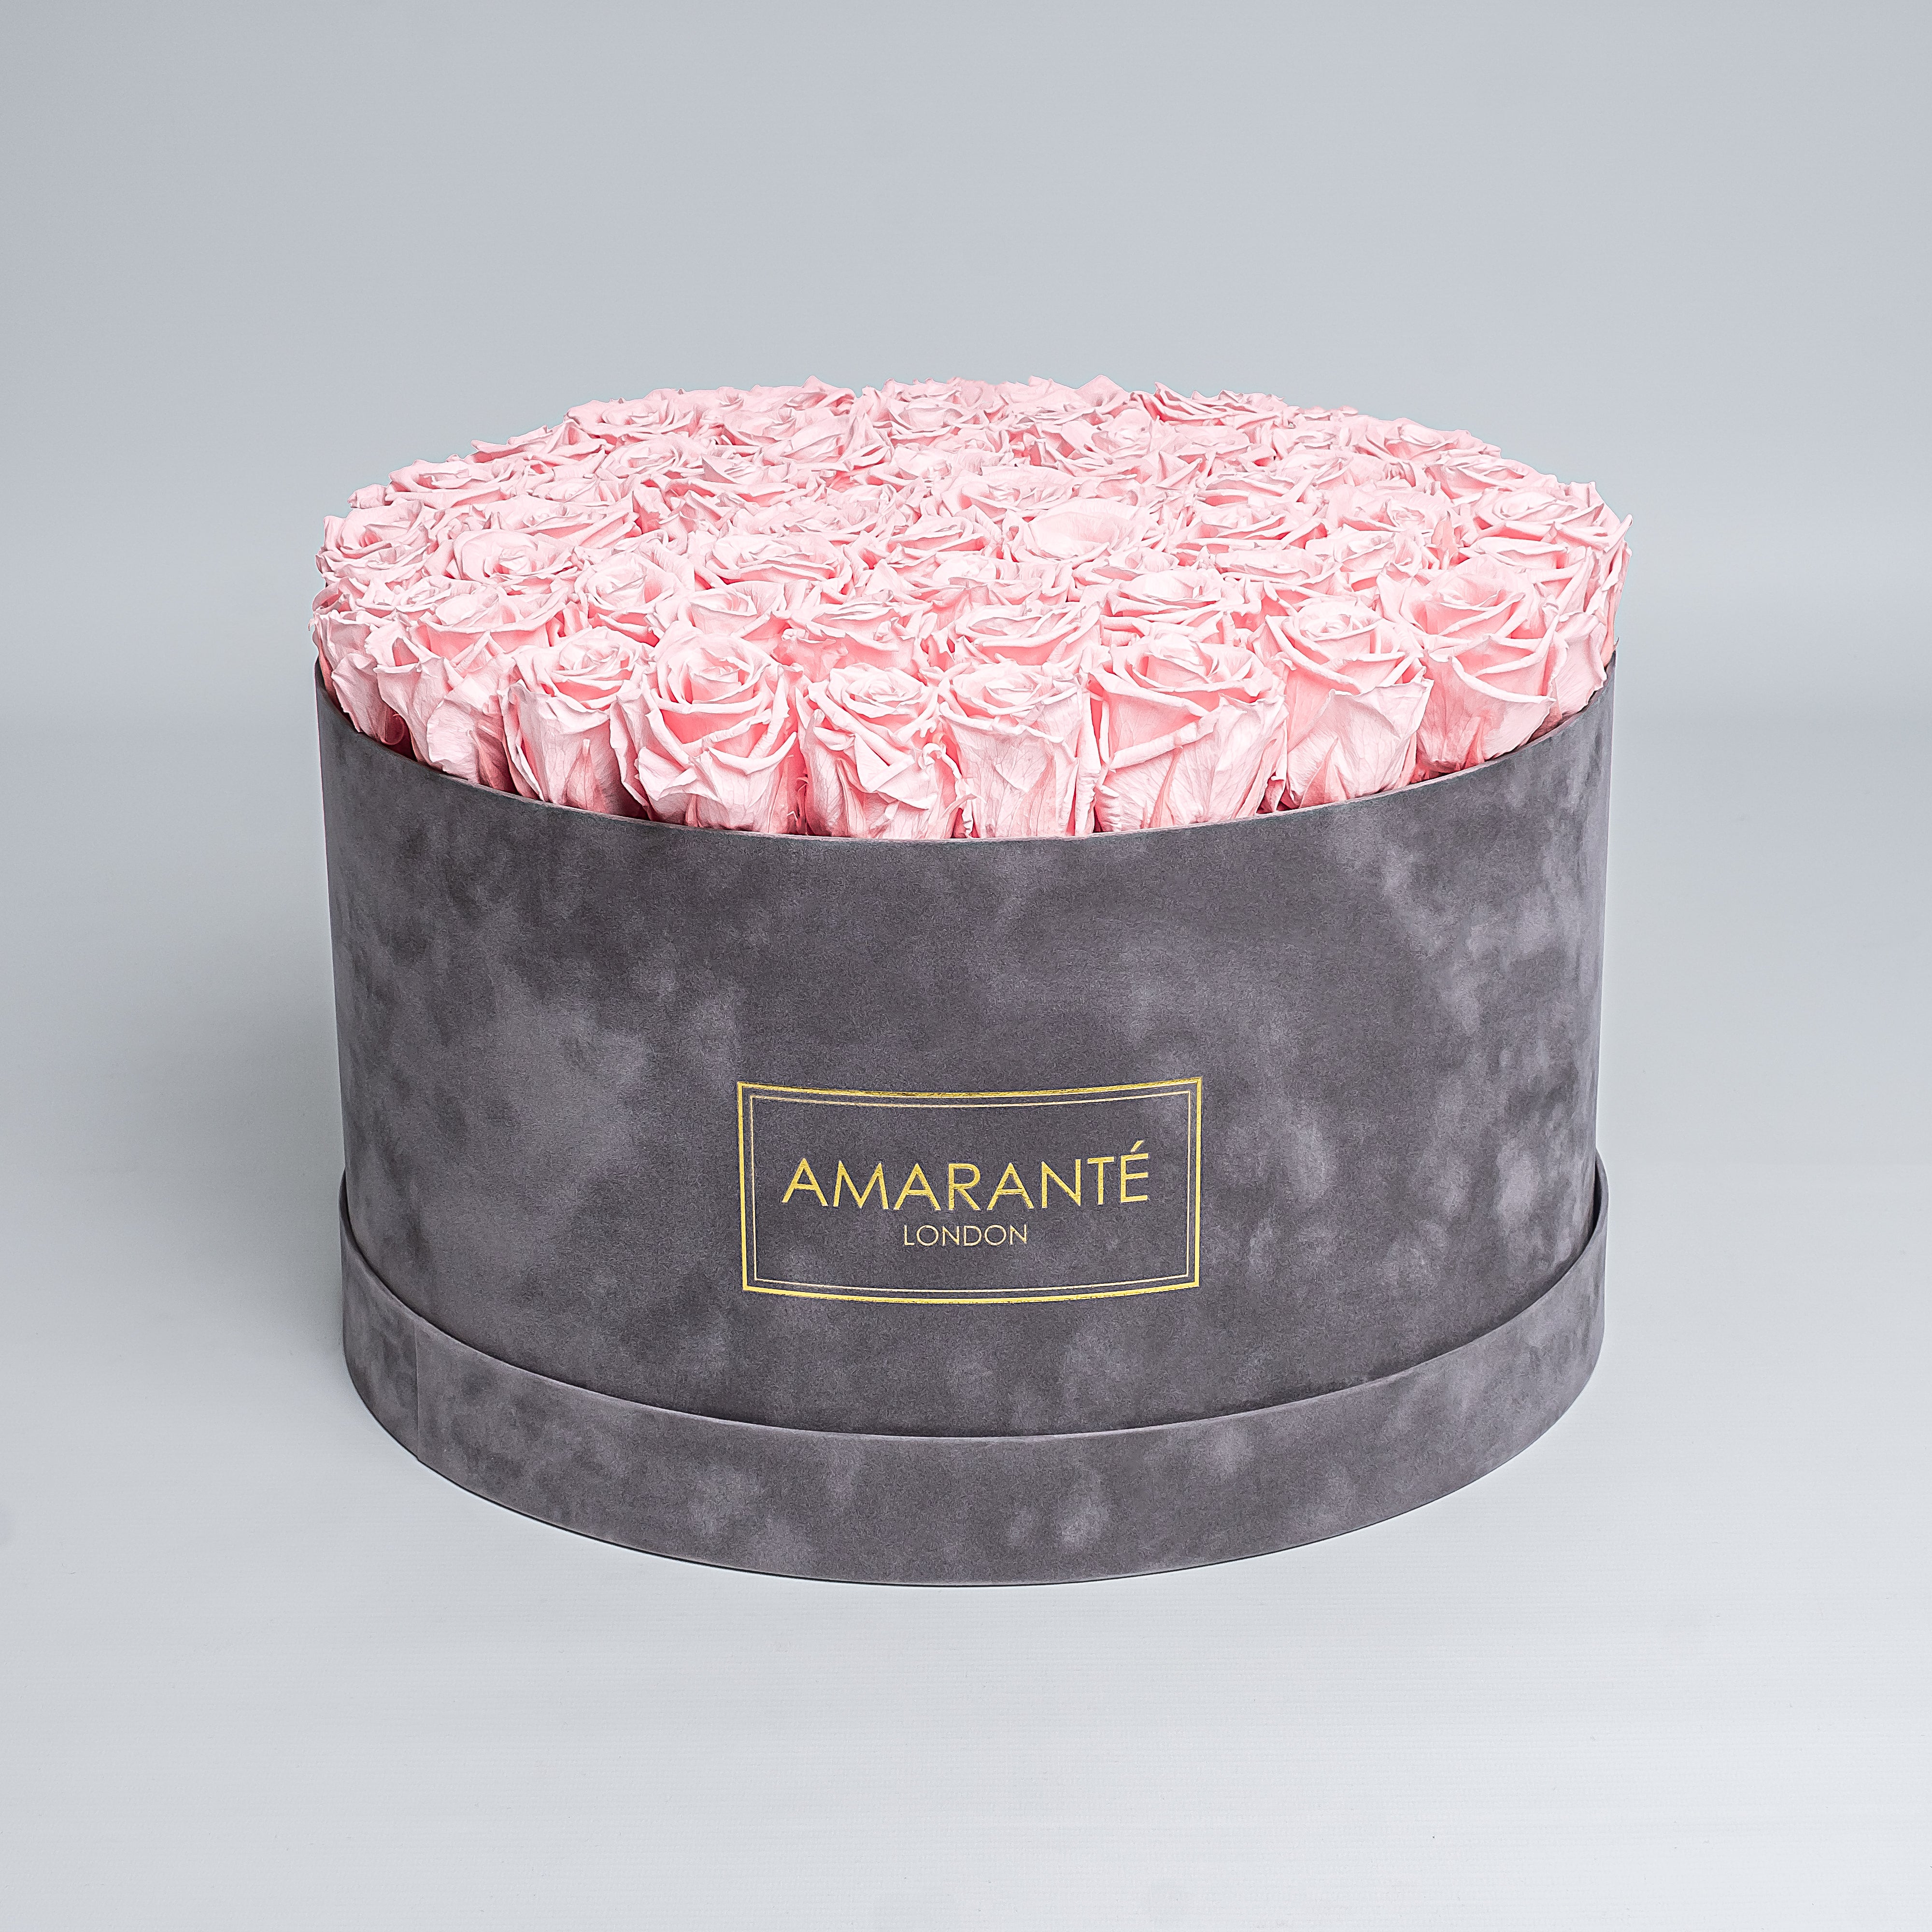 Exquisite delicate pink infinity roses in a sophisticated grey suede finish rose box. This chic, stylish gift idea, makes a thoughtful surprise for loved ones including mum, wife or a dear friend for any occasion, from Valentine's Day, to a Birthday or Anniversary or other important occasion. Free UK Delivery.